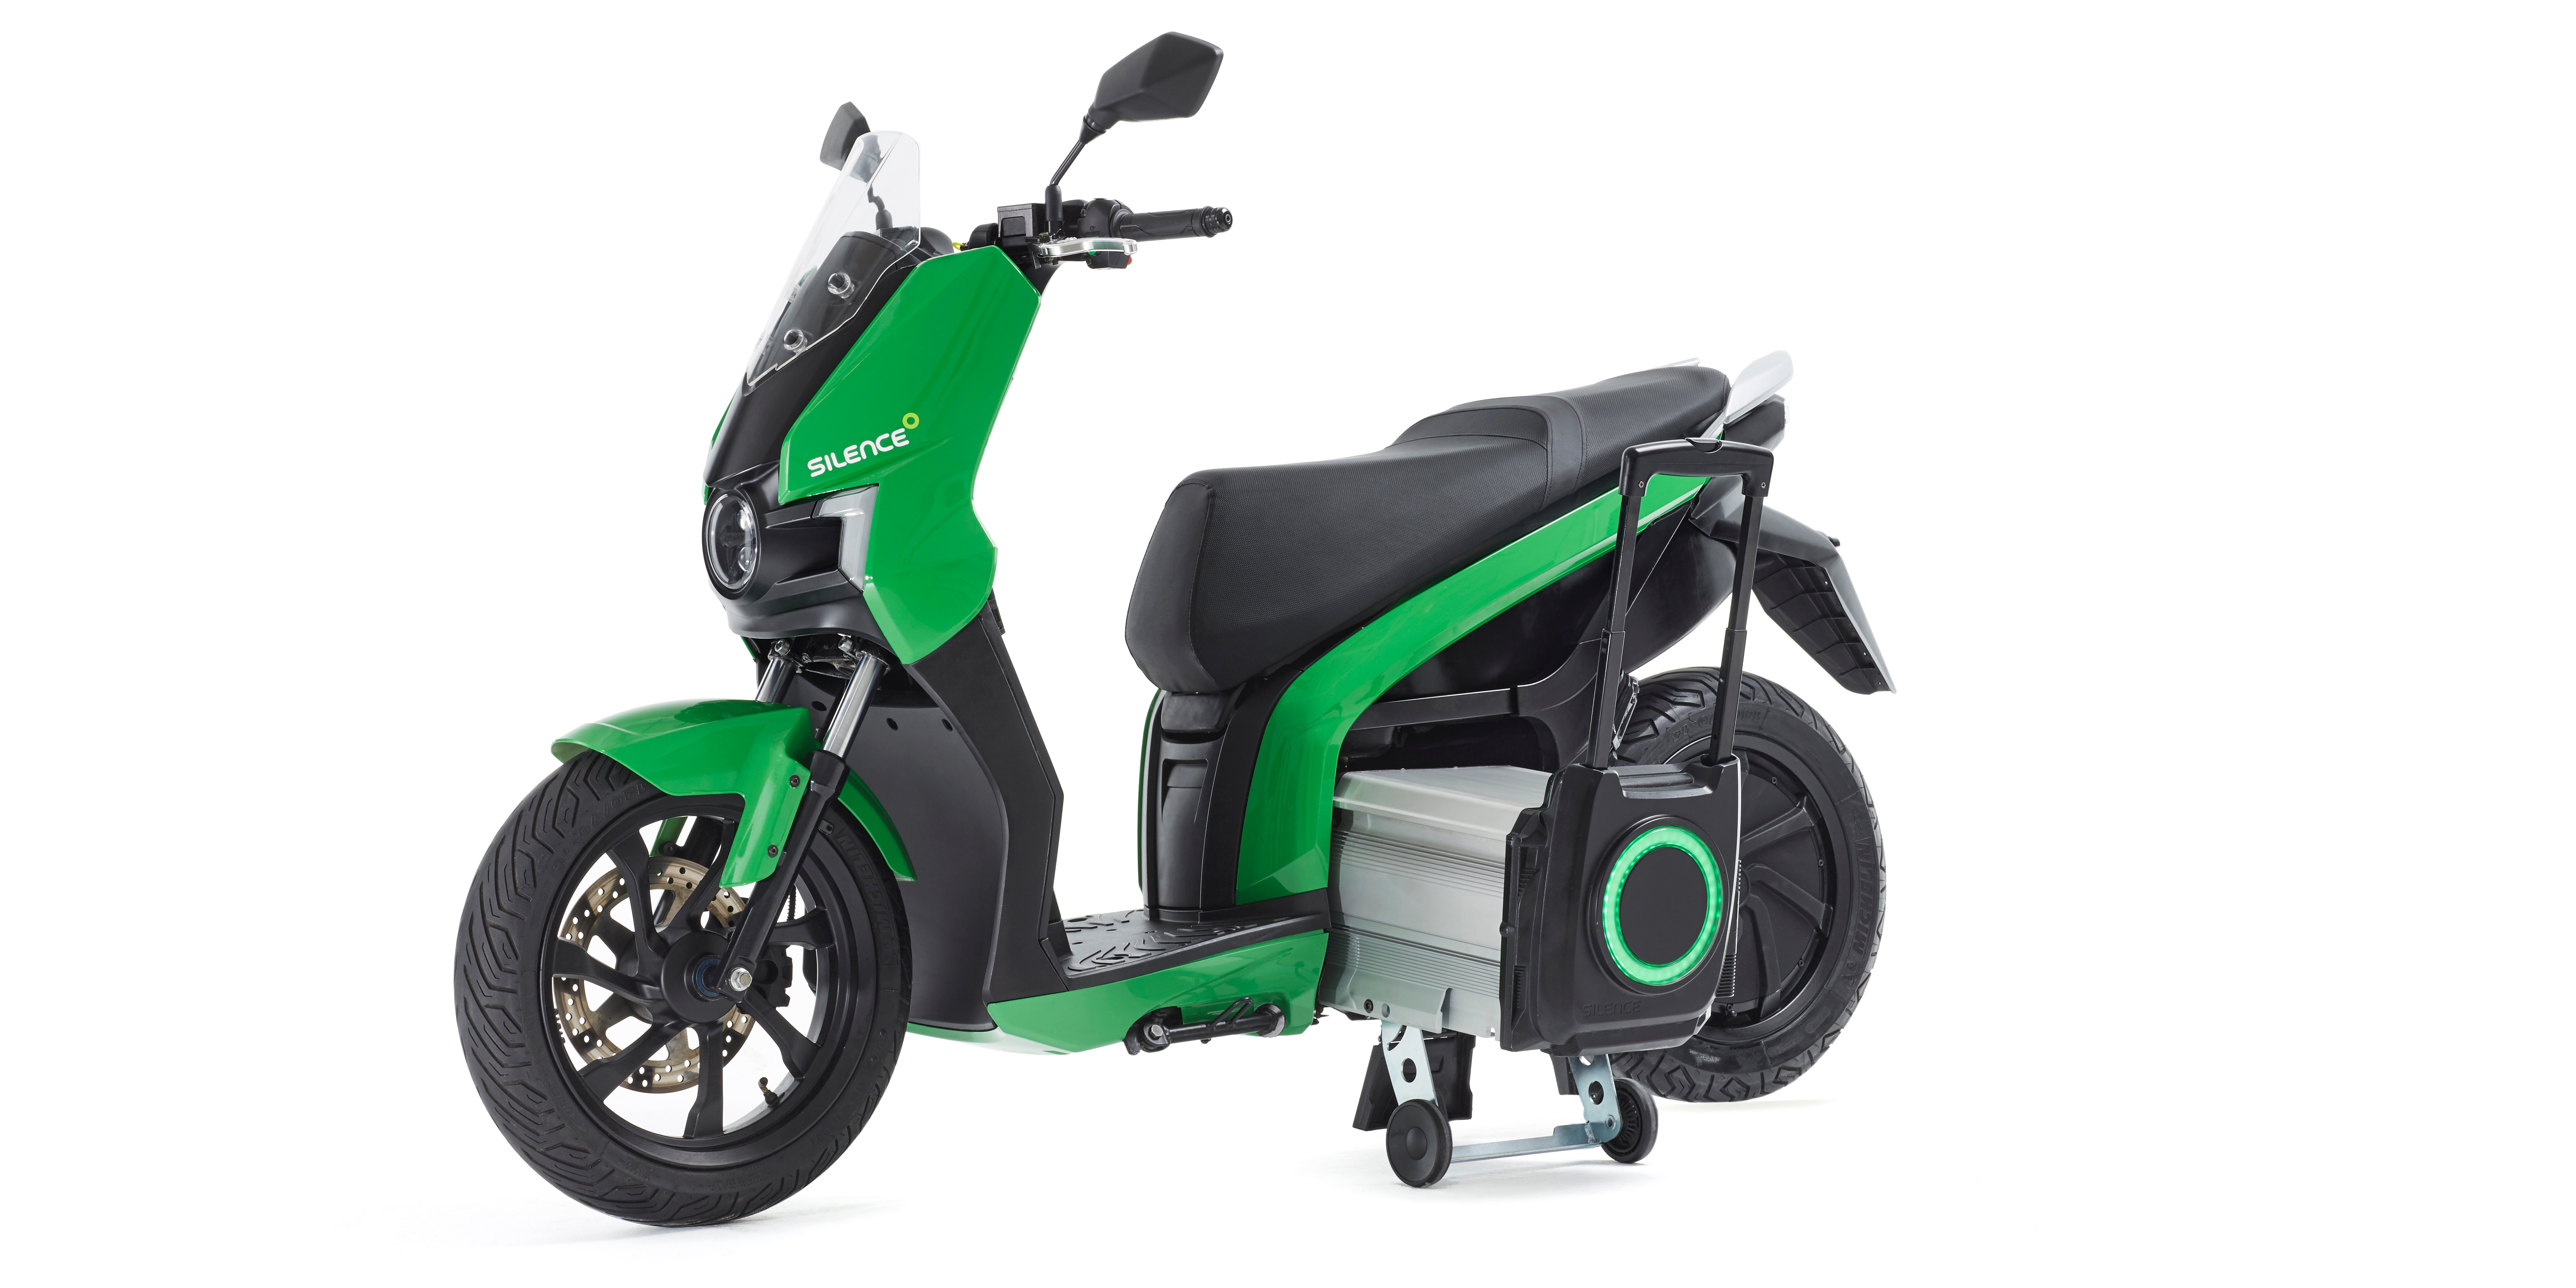 Silence’s 100 km/h electric scooters with removable wheeled batteries are expanding across Europe